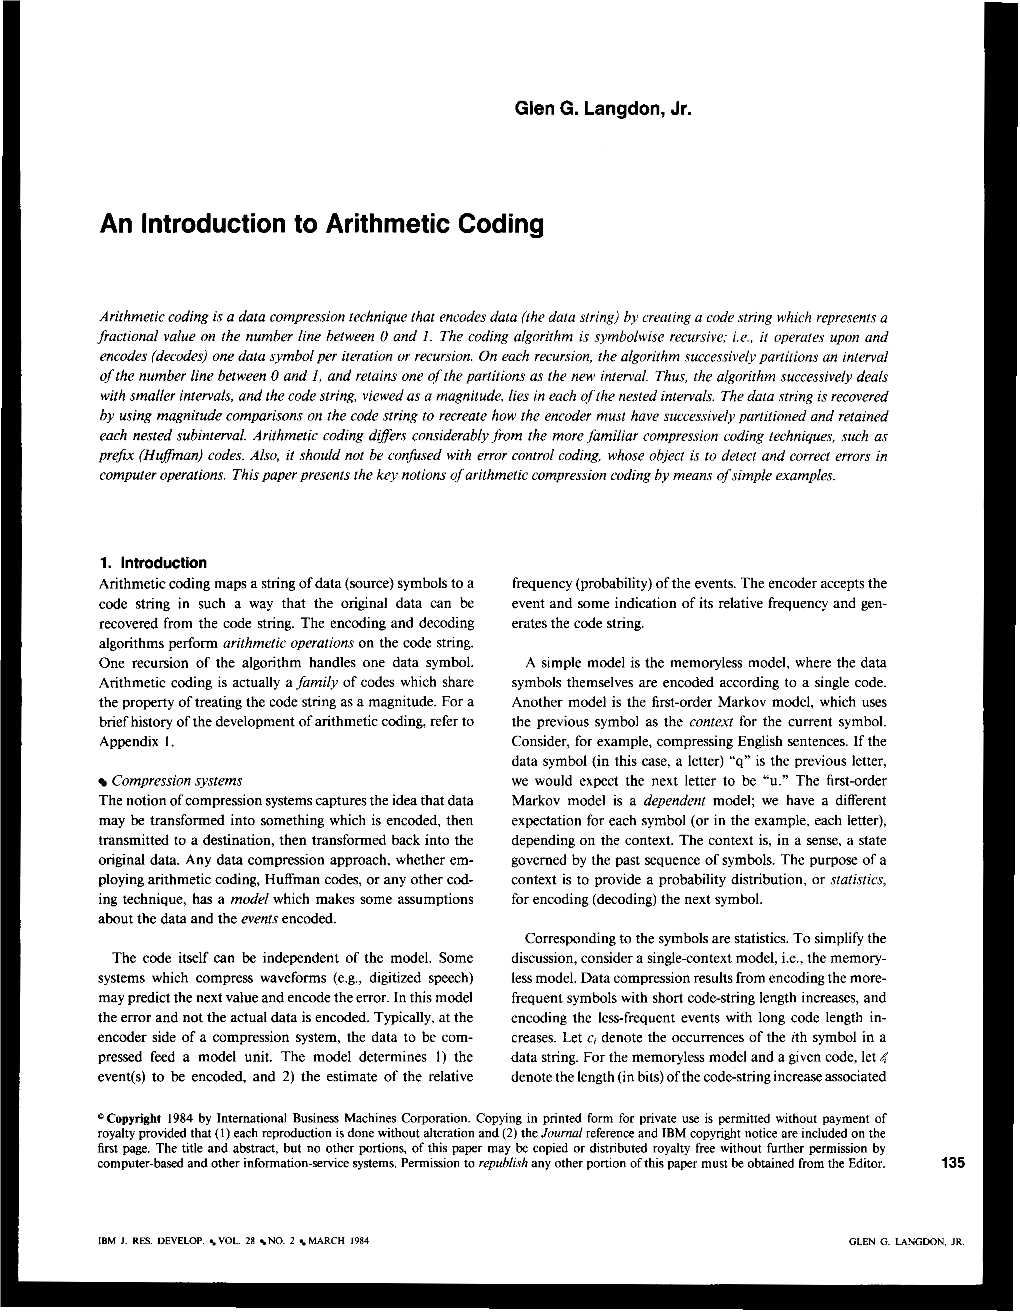 An Introduction to Arithmetic Coding